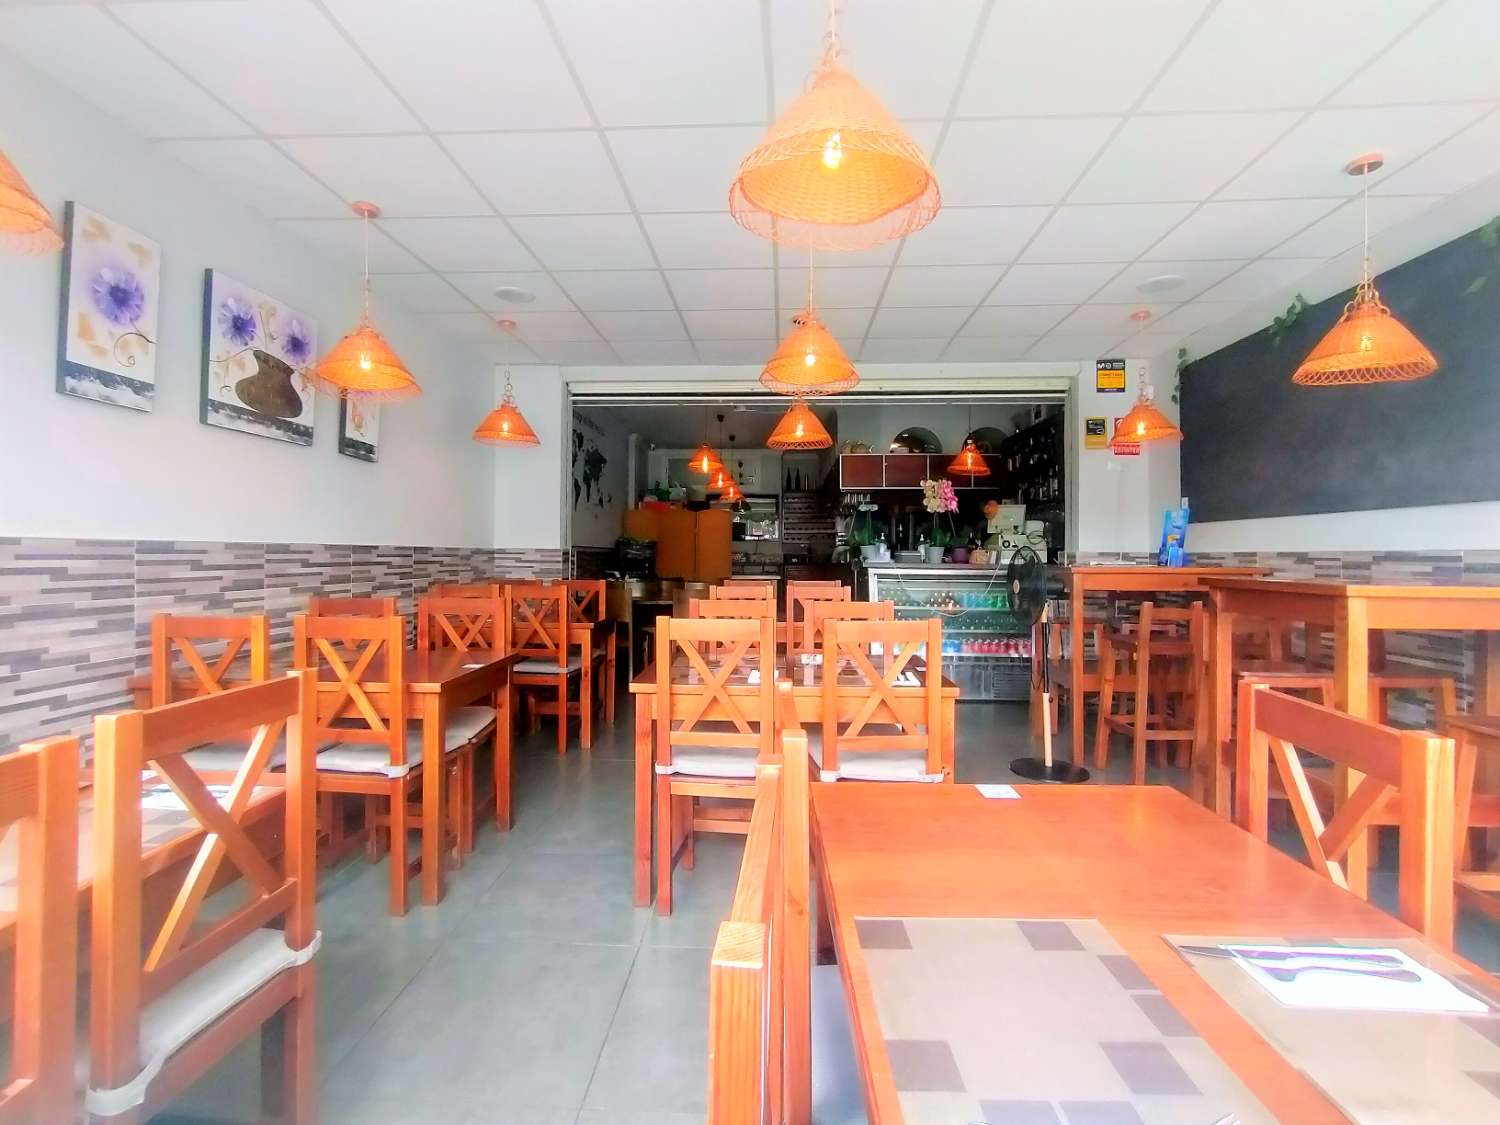 Bar & Restaurant in Benalmadena Costa del Sol - 50 meters from the beach - Excellent location